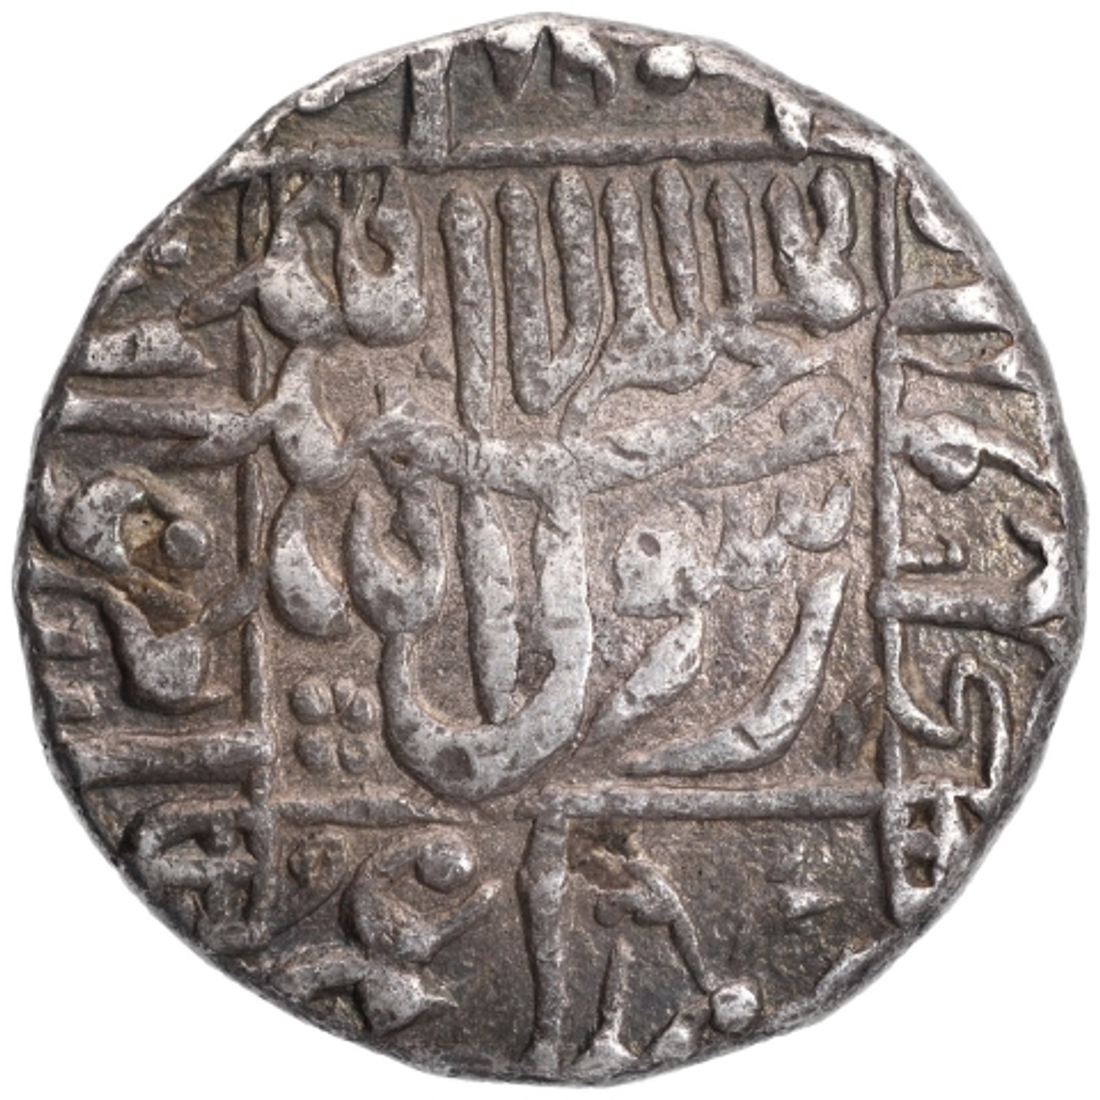 Silver One Rupee Coin of Murad Bakhsh of Surat Mint.